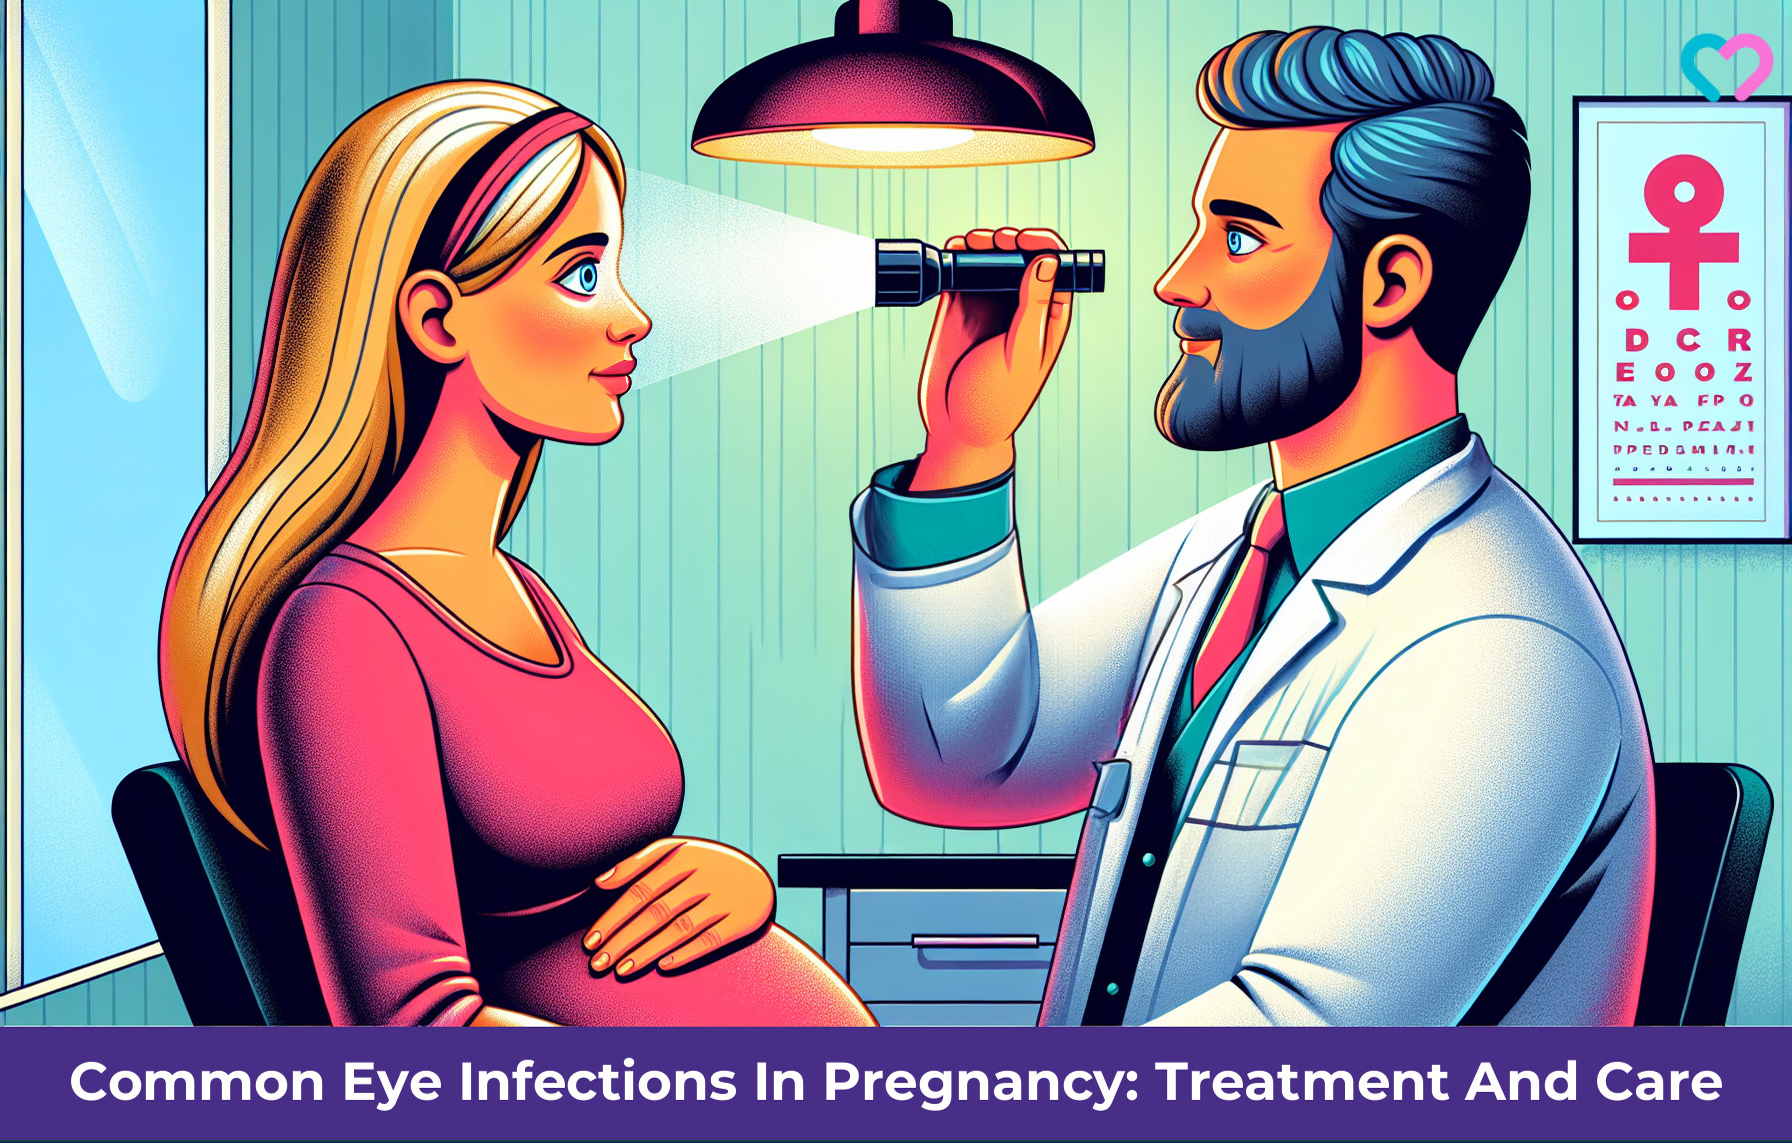 eye infection while pregnant_illustration